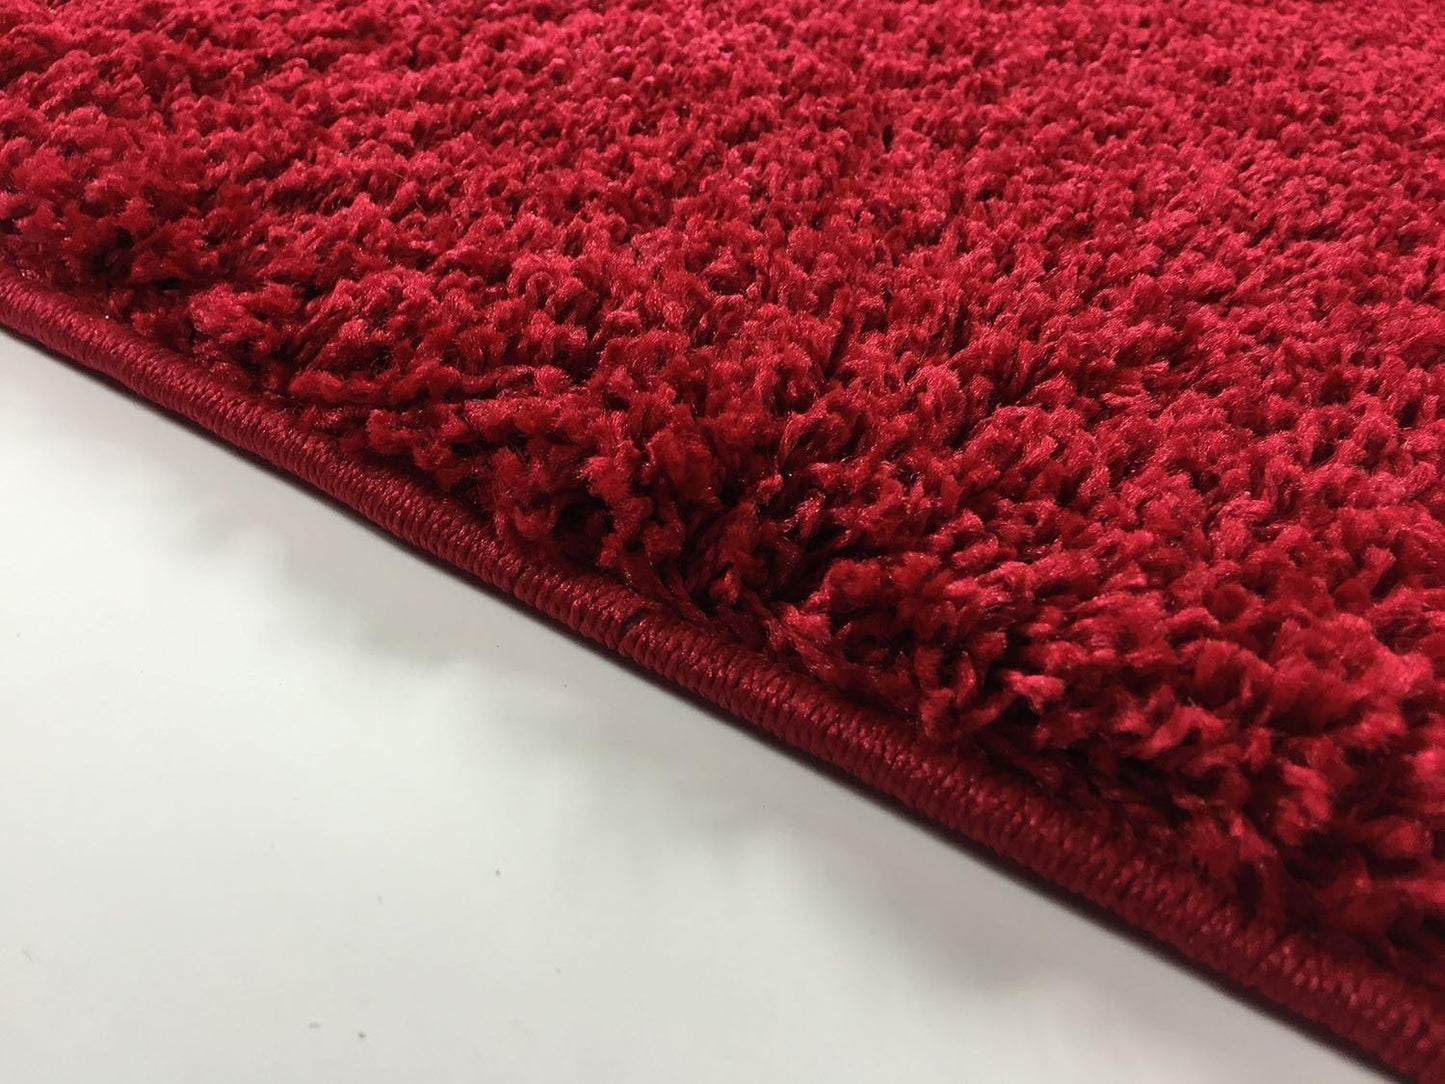 SOHO Shaggy Collection Solid Color Shag Area Rug Rugs 7 Color Options (Red, 8 x 10)